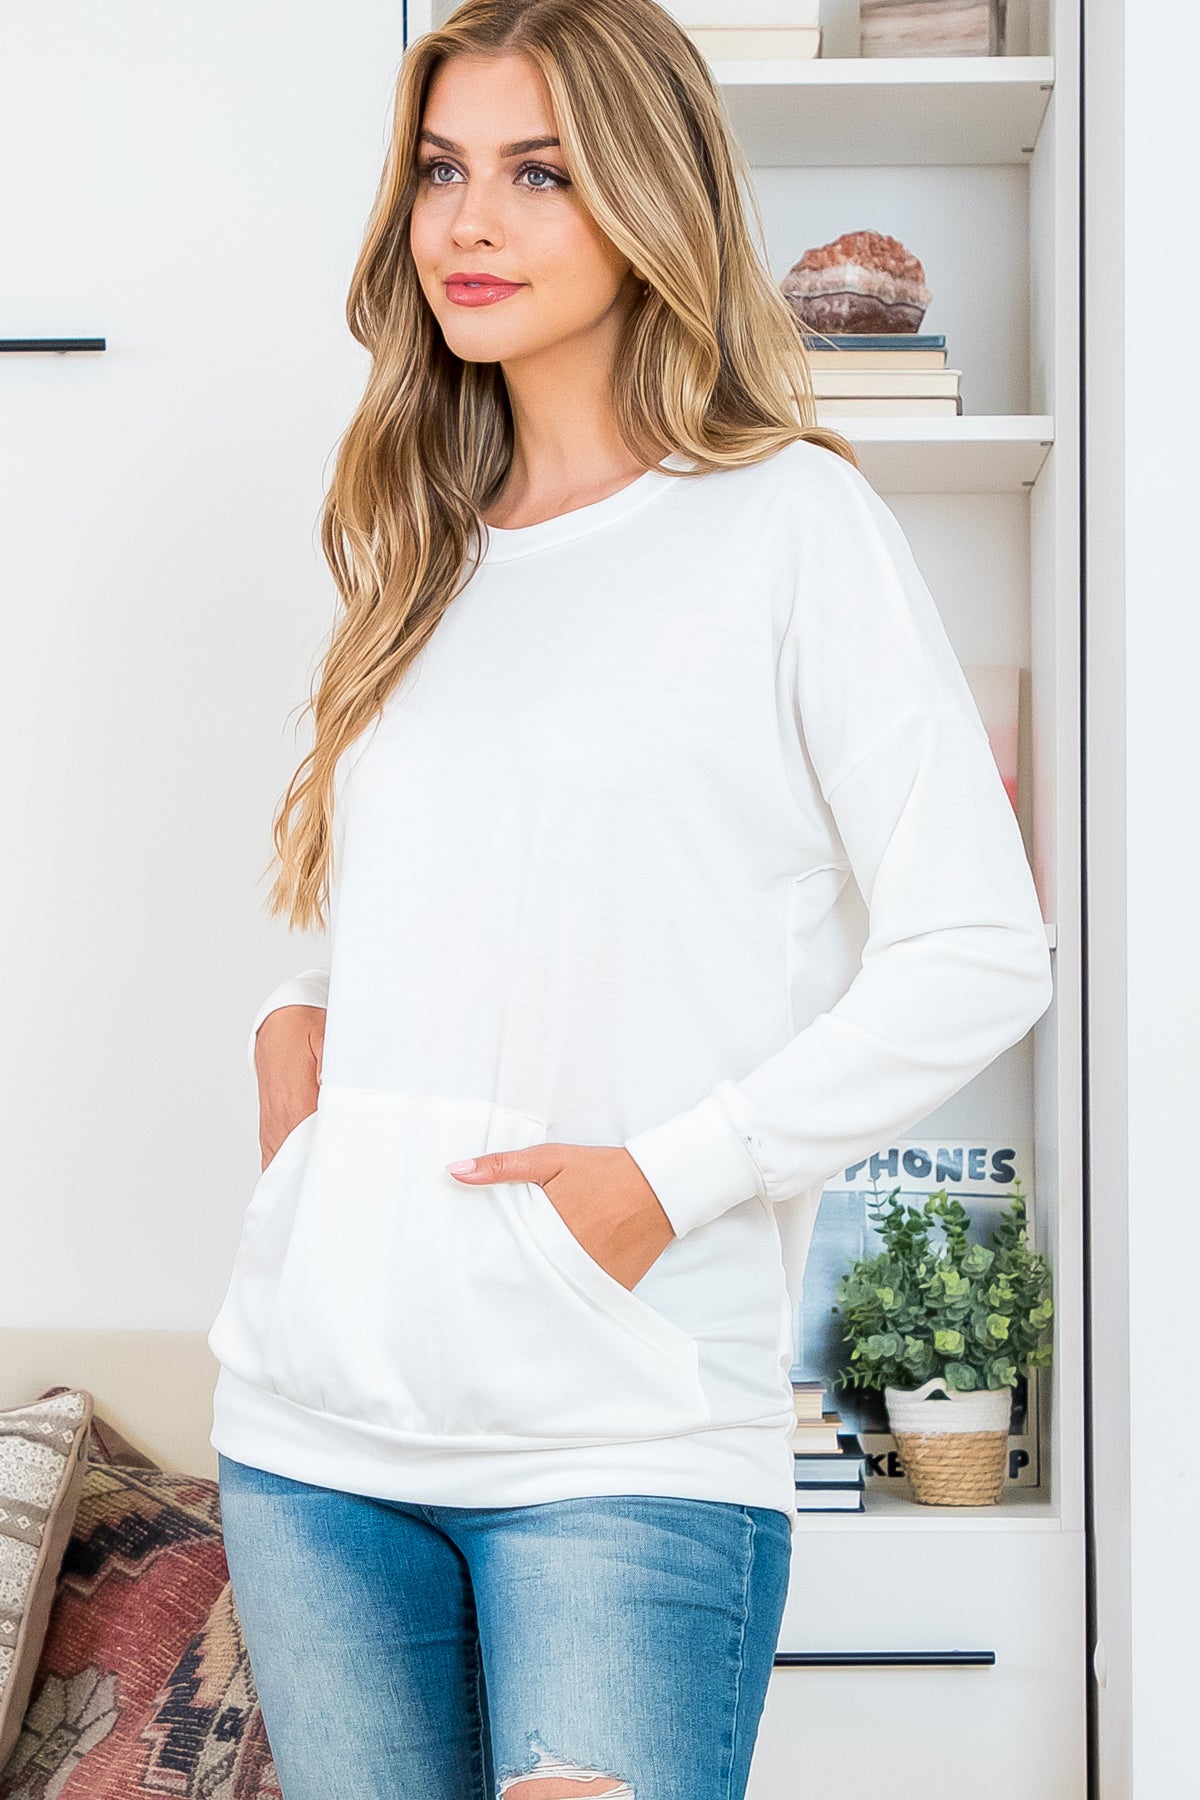 LONG SLEEVE FRENCH TERRY TOP WITH KANGAROO POCKET TOP 1-1-1-1